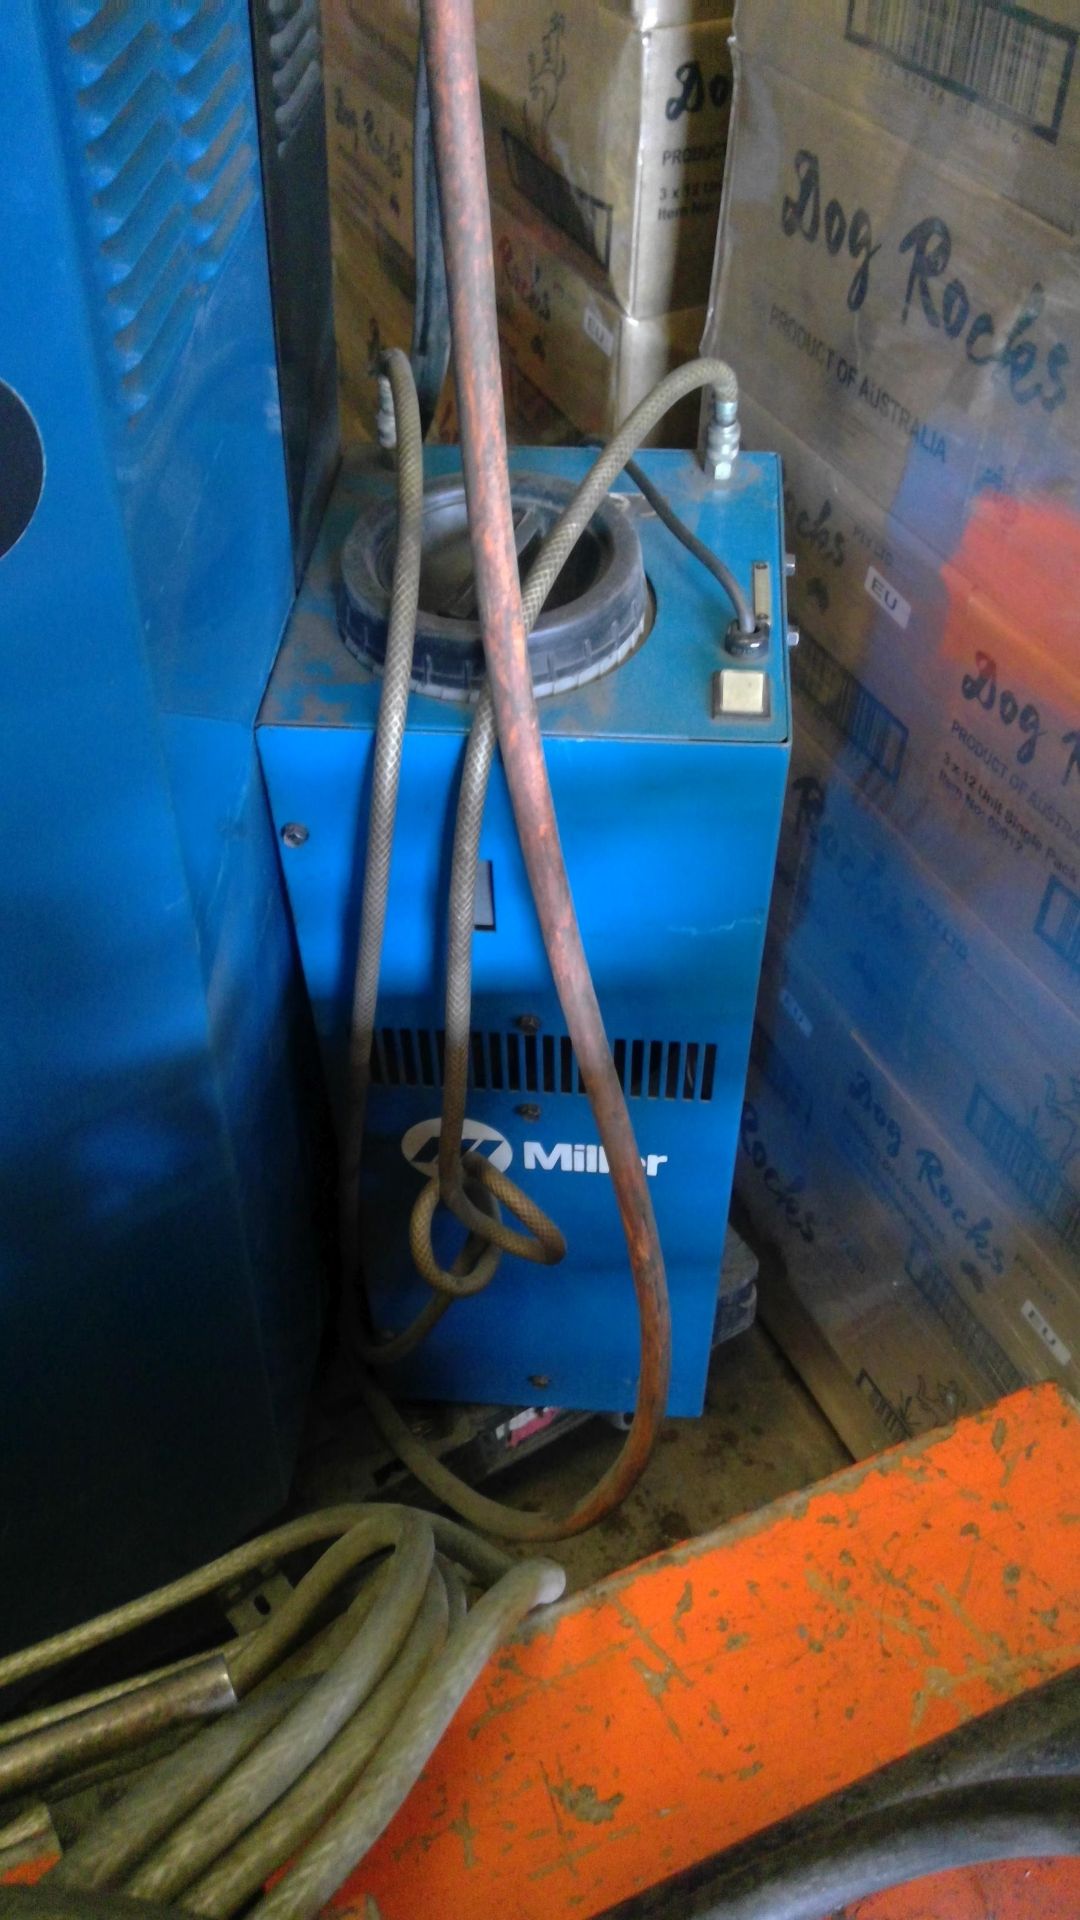 Miller Syncrowave 351 AC/DC Tig Welder including Torch and Optional Foot Pedal Control - 3 Phase - Image 2 of 2